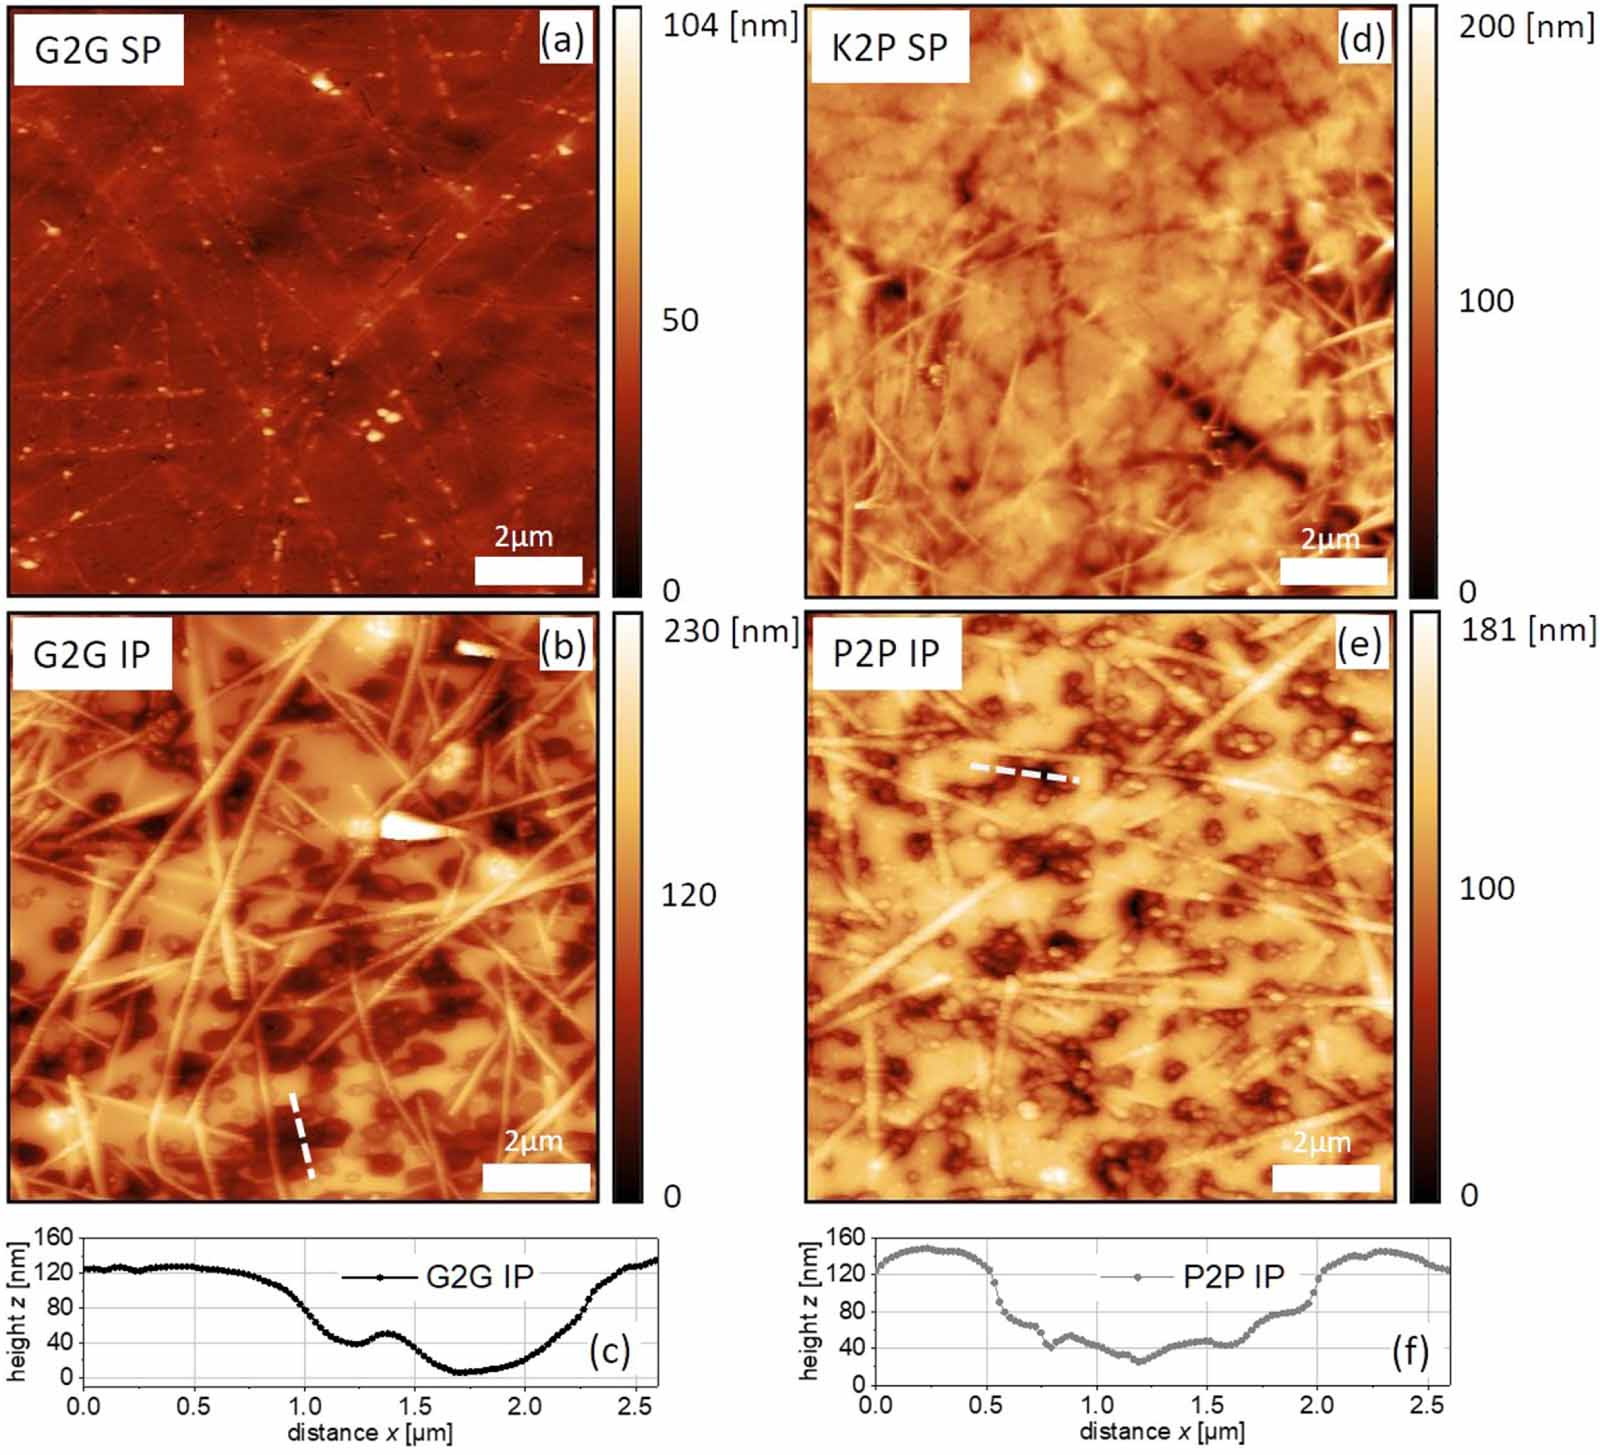 Figure 5. from “Gentle plasma process for embedded silver-nanowire flexible transparent electrodes on temperature-sensitive polymer substrates “ by Lukas Kinner et al.: The sample surfaces were characterized with atomic force microscopy (AFM) in tapping mode, using high-resolution NANOSENSORS™ SuperSharpSilicon™ SSS-NCHR AFM probes.
AFM images of the AgNW electrodes for: (a) G2G SP, (b) G2G IP, (c) height profile for the dashed line marked in (b), (d) K2P SP, (e) P2P IP, (f) height profile for the dashed line marked in (e).
